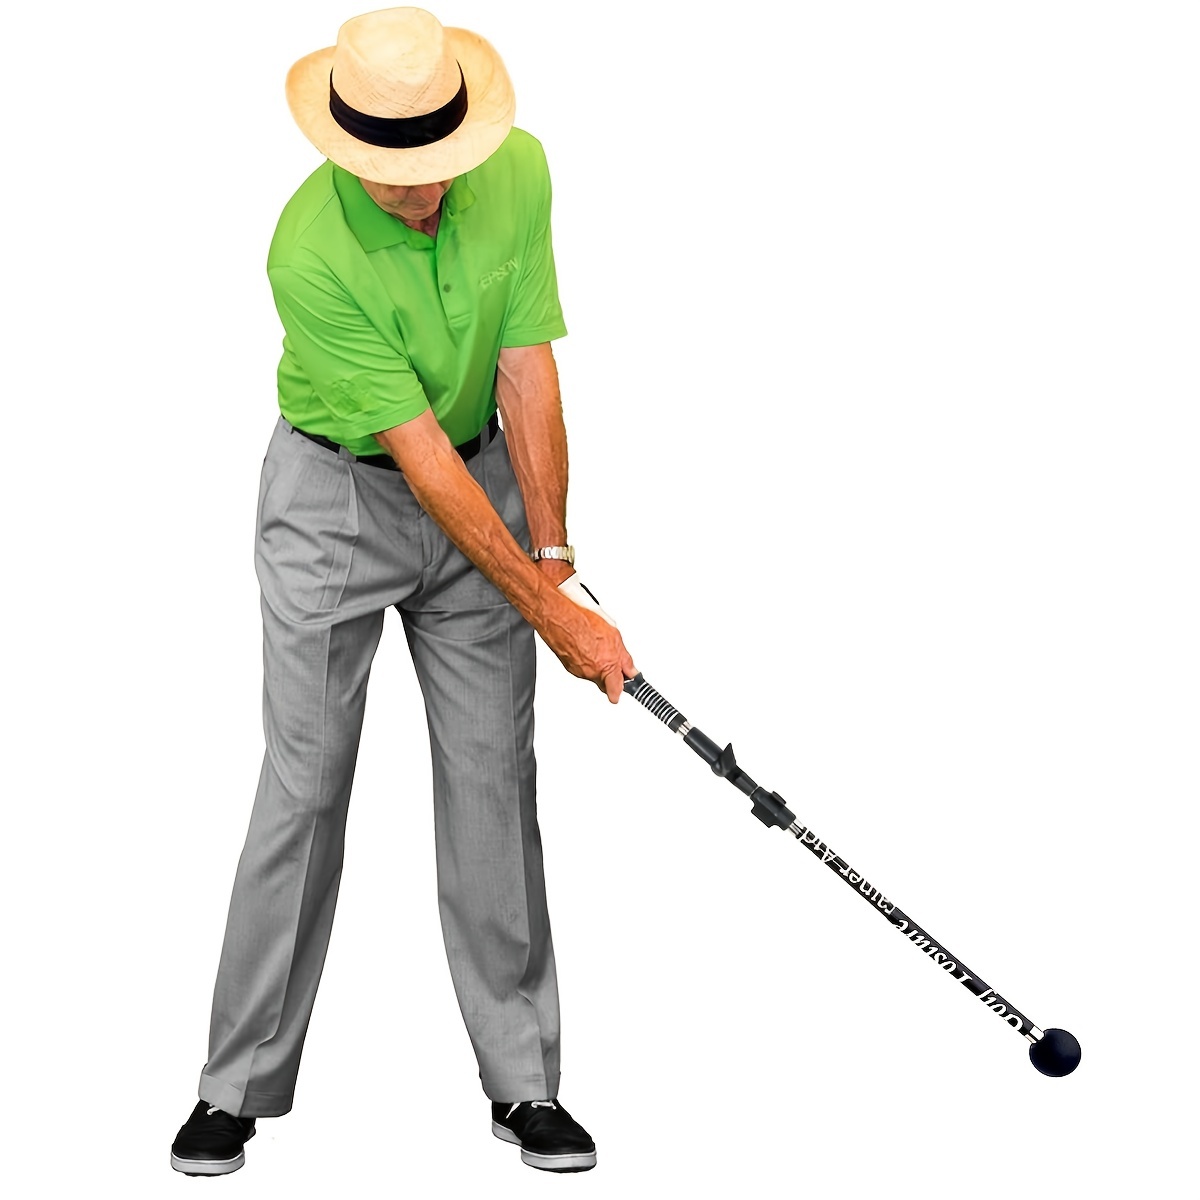 Tips and tricks for improving grip and power in your golf game